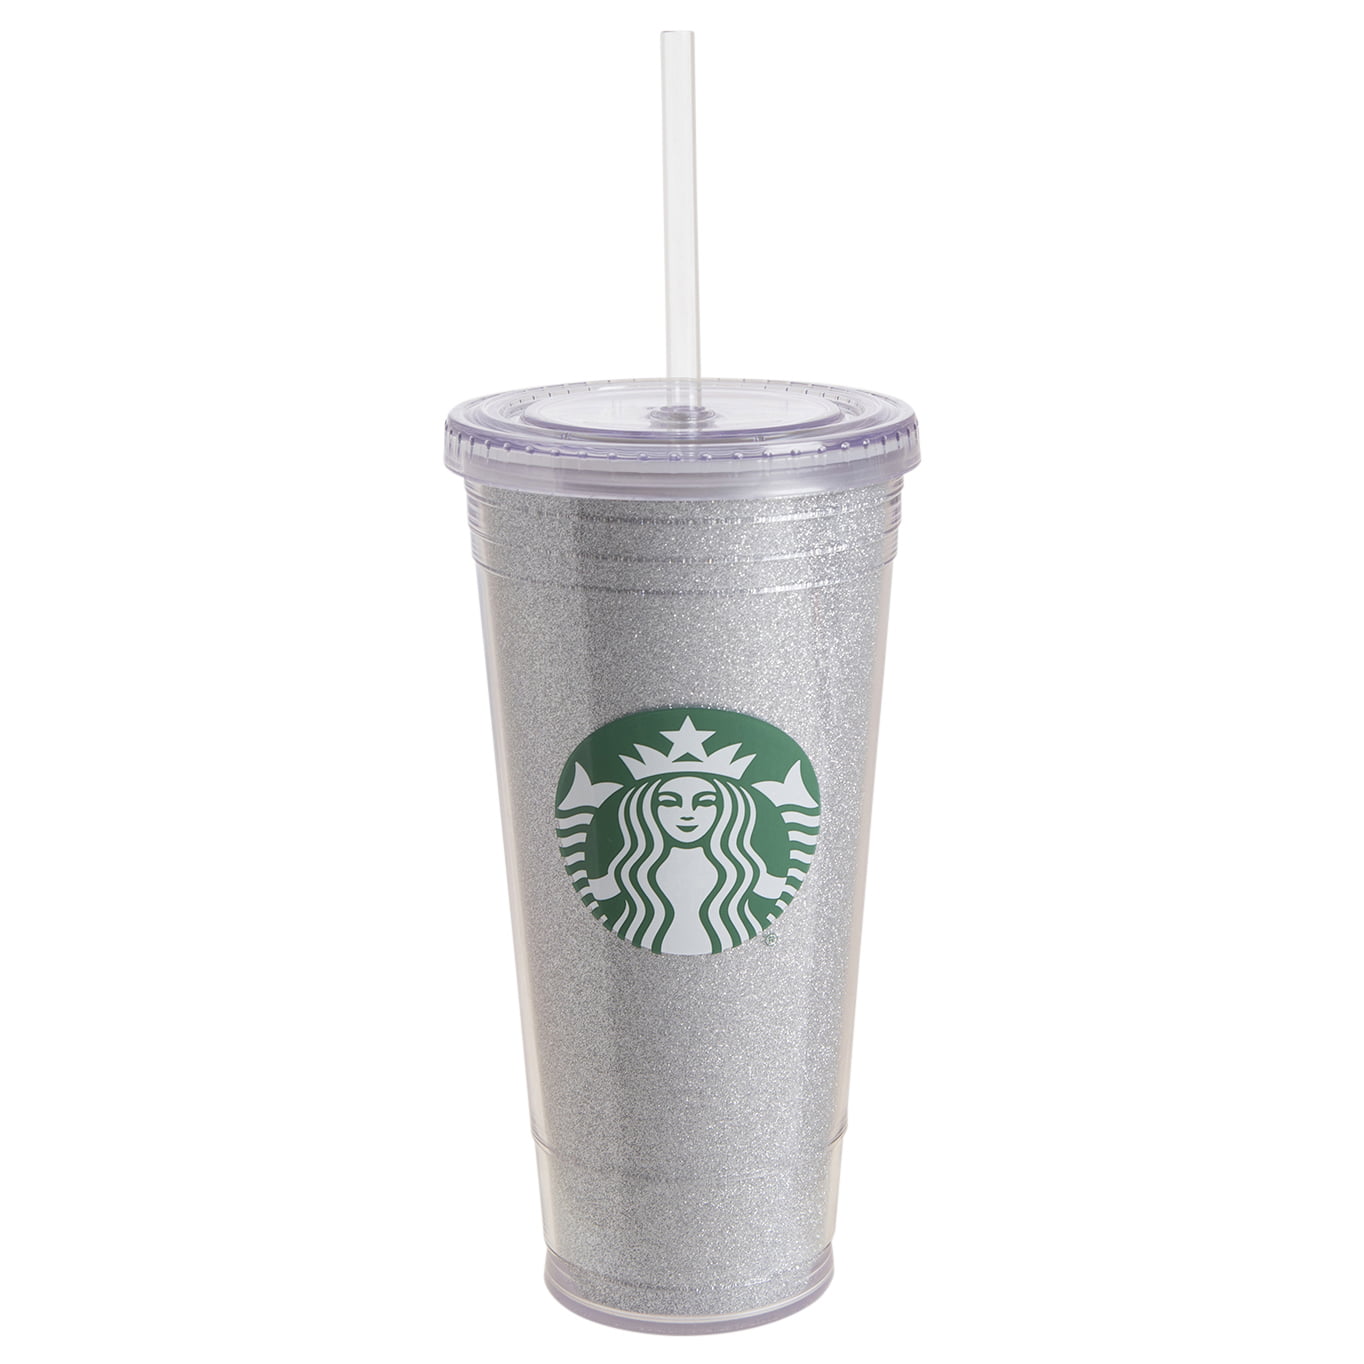 Starbucks Stainless Steel Cold Cup - Silver, 24 oz - Kroger